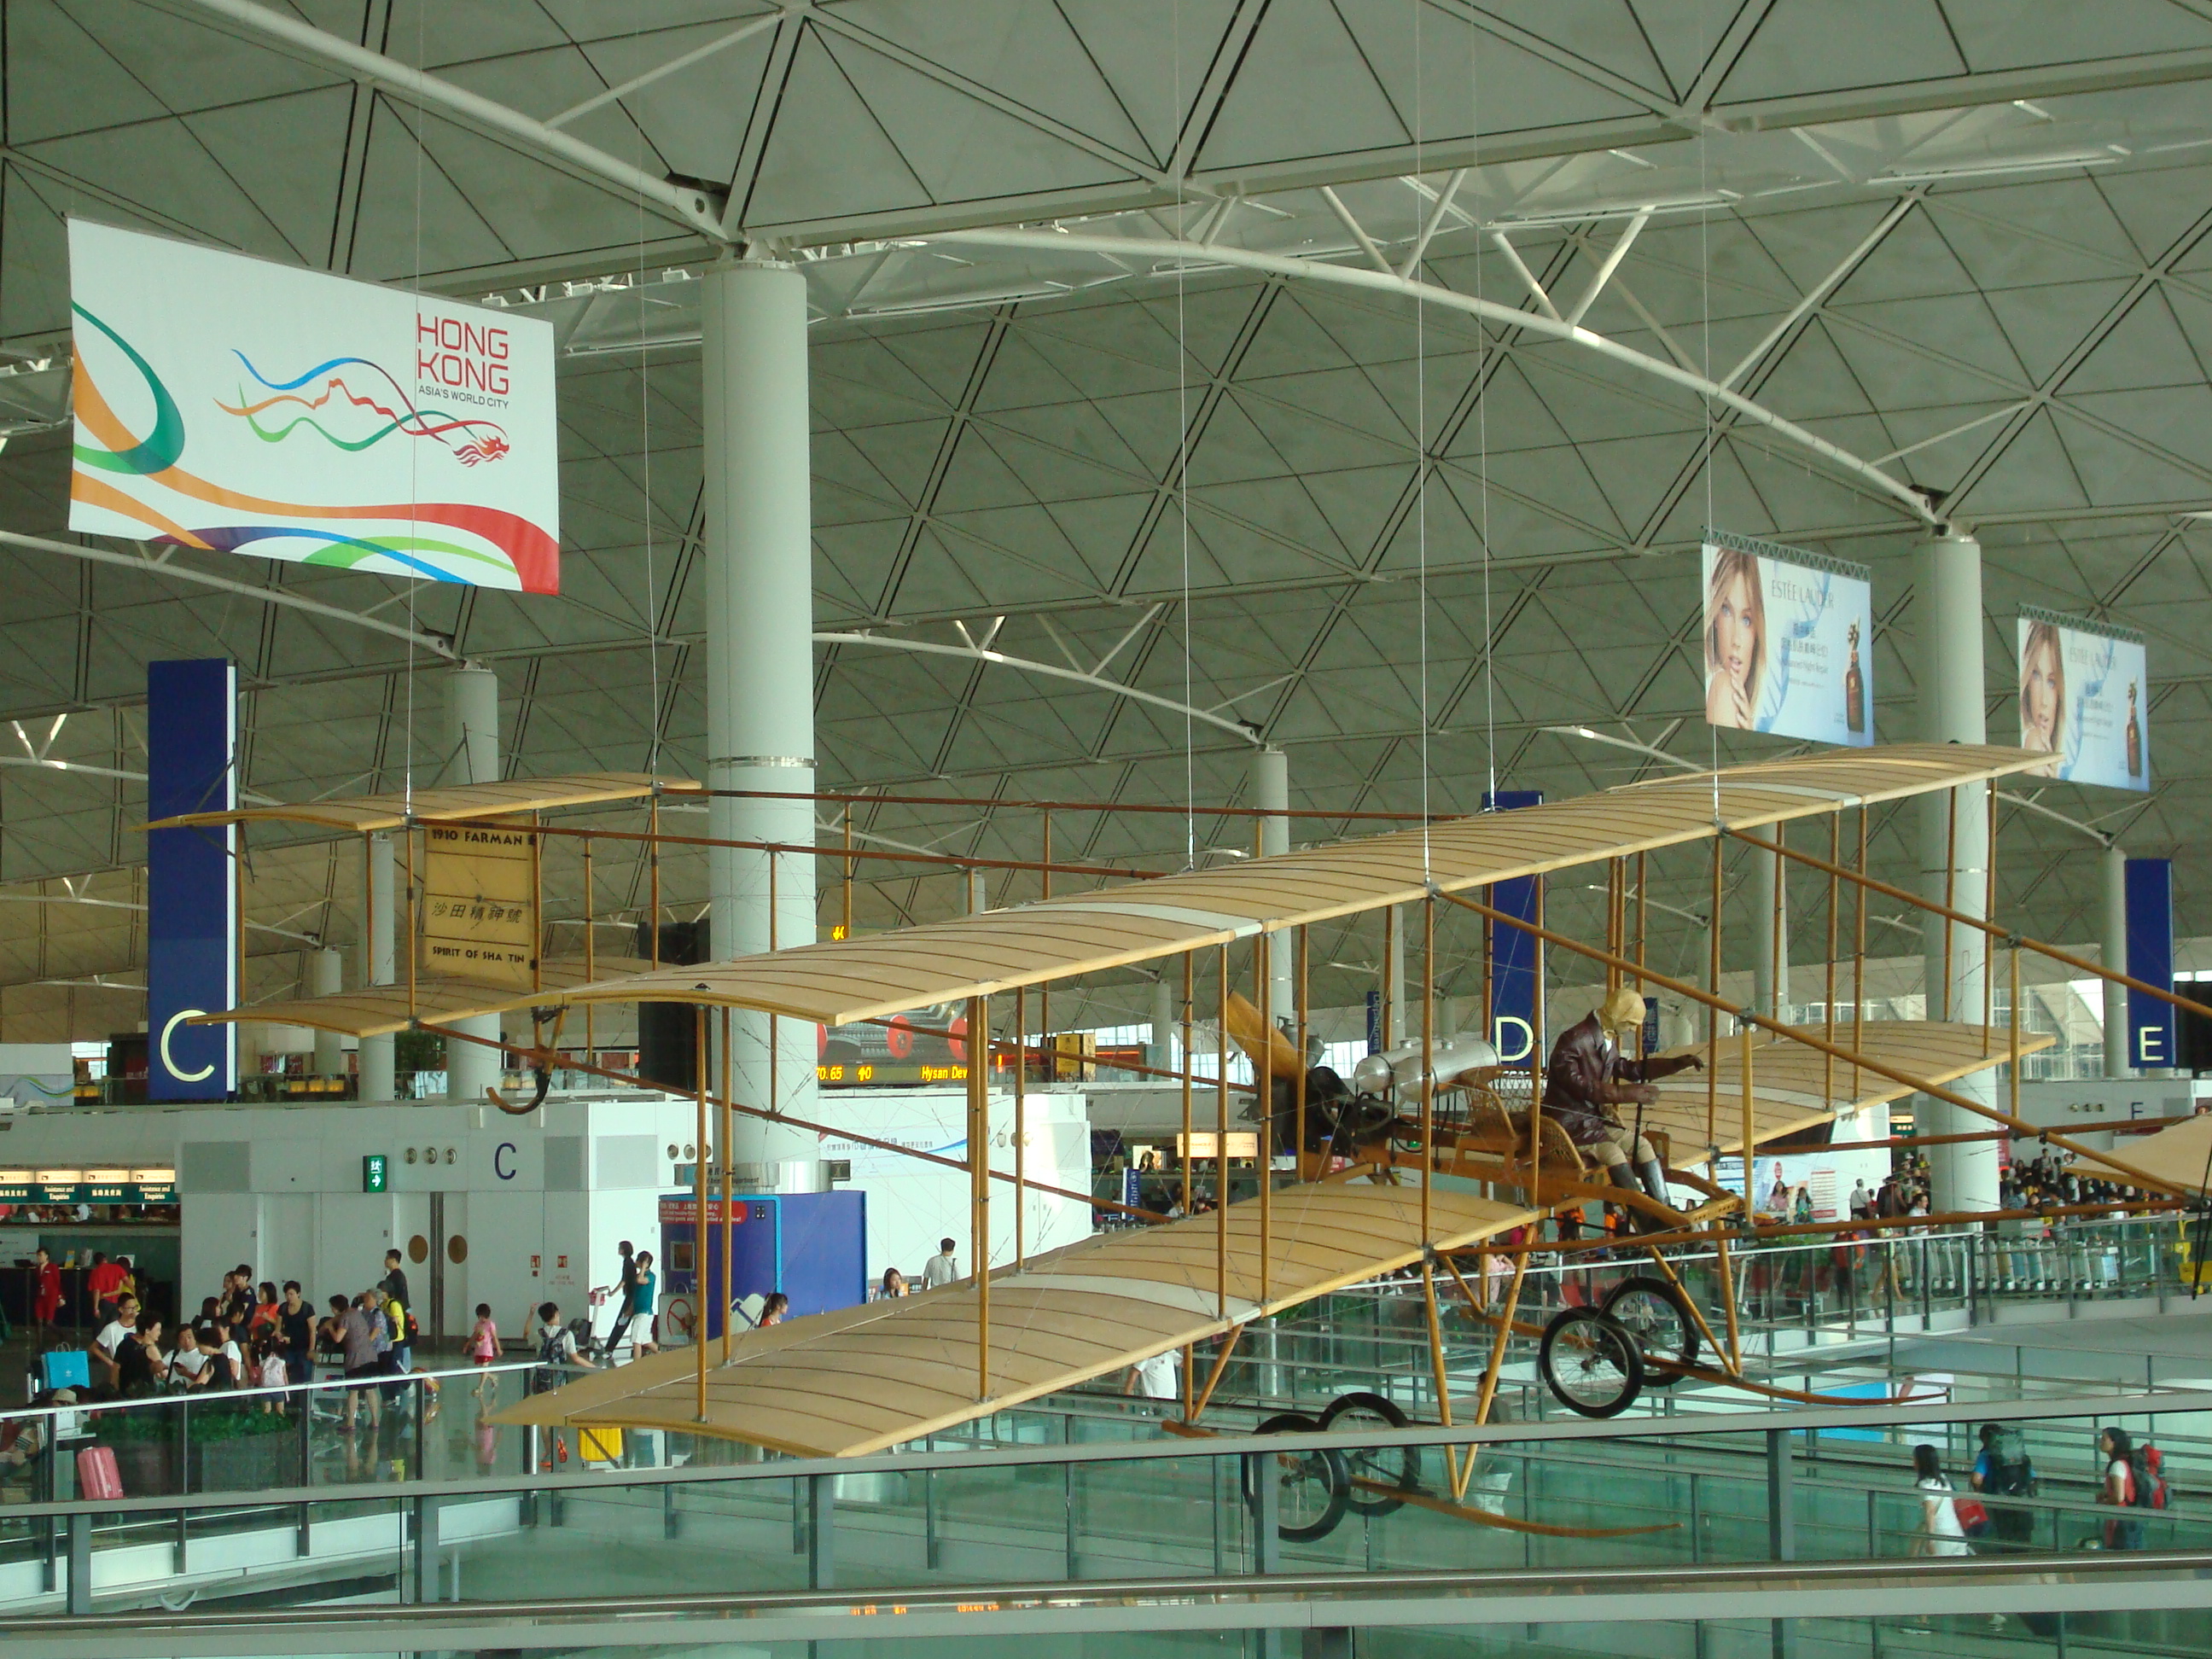 Wright Brothers Flyer in Hong Kong Airport